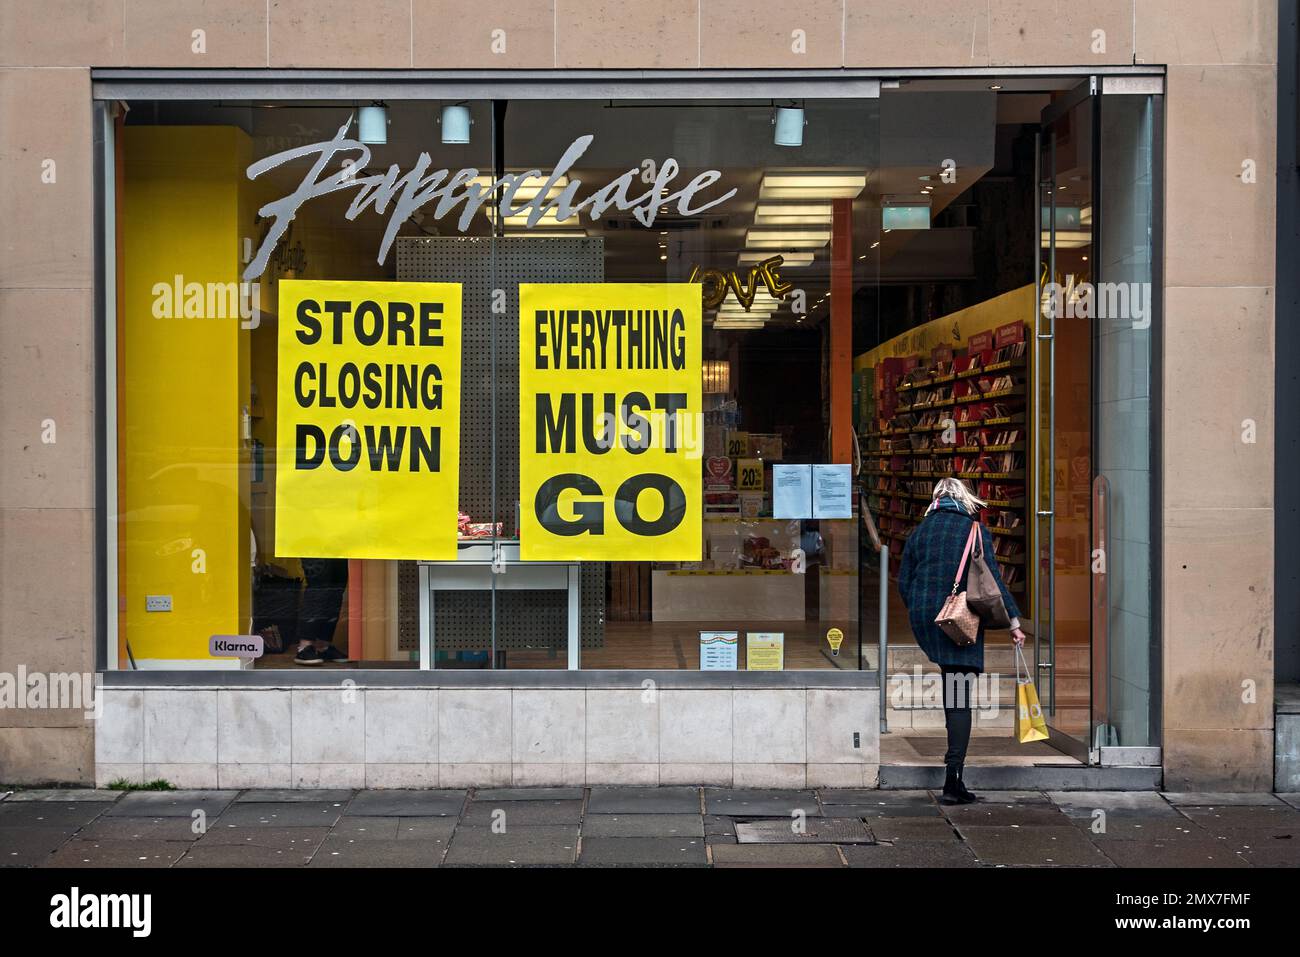 Paperchase store on George Street in Edinburgh closing down after going into administration and being acquired by Tesco. Stock Photo